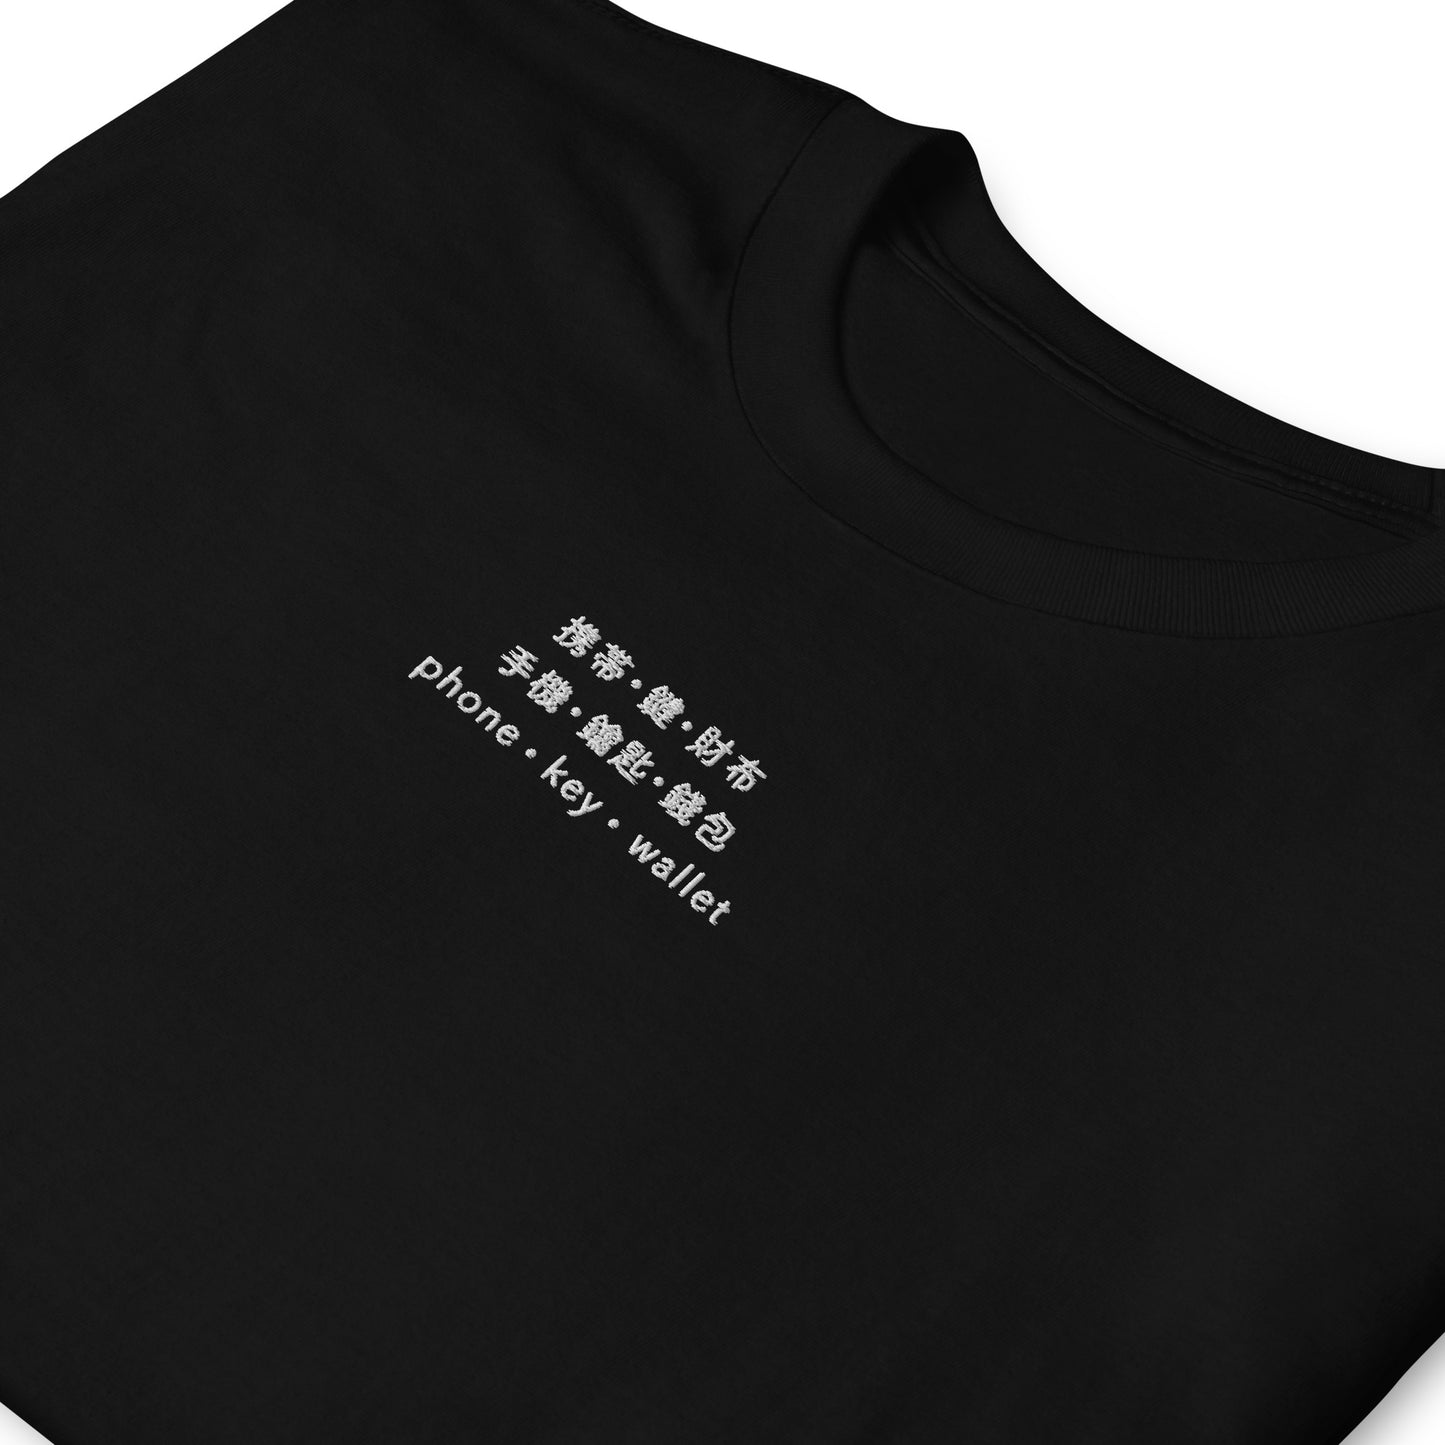 Black High Quality Tee - Front Design with an White Embroidery "Phone/Key/Wallet" in Japanese,Chinese and English